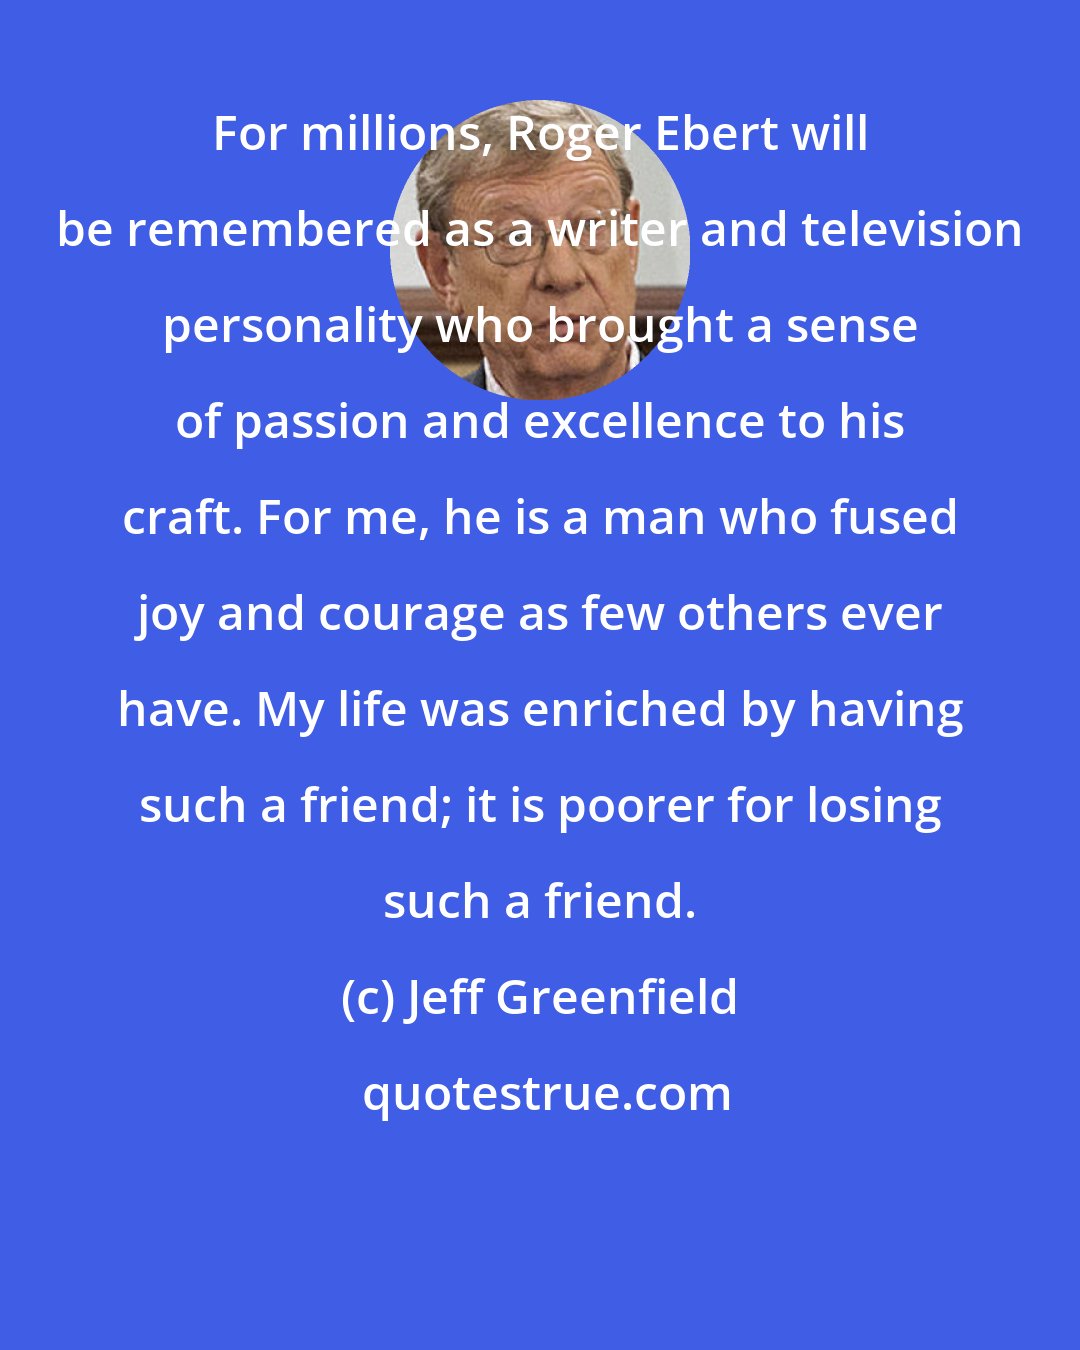 Jeff Greenfield: For millions, Roger Ebert will be remembered as a writer and television personality who brought a sense of passion and excellence to his craft. For me, he is a man who fused joy and courage as few others ever have. My life was enriched by having such a friend; it is poorer for losing such a friend.